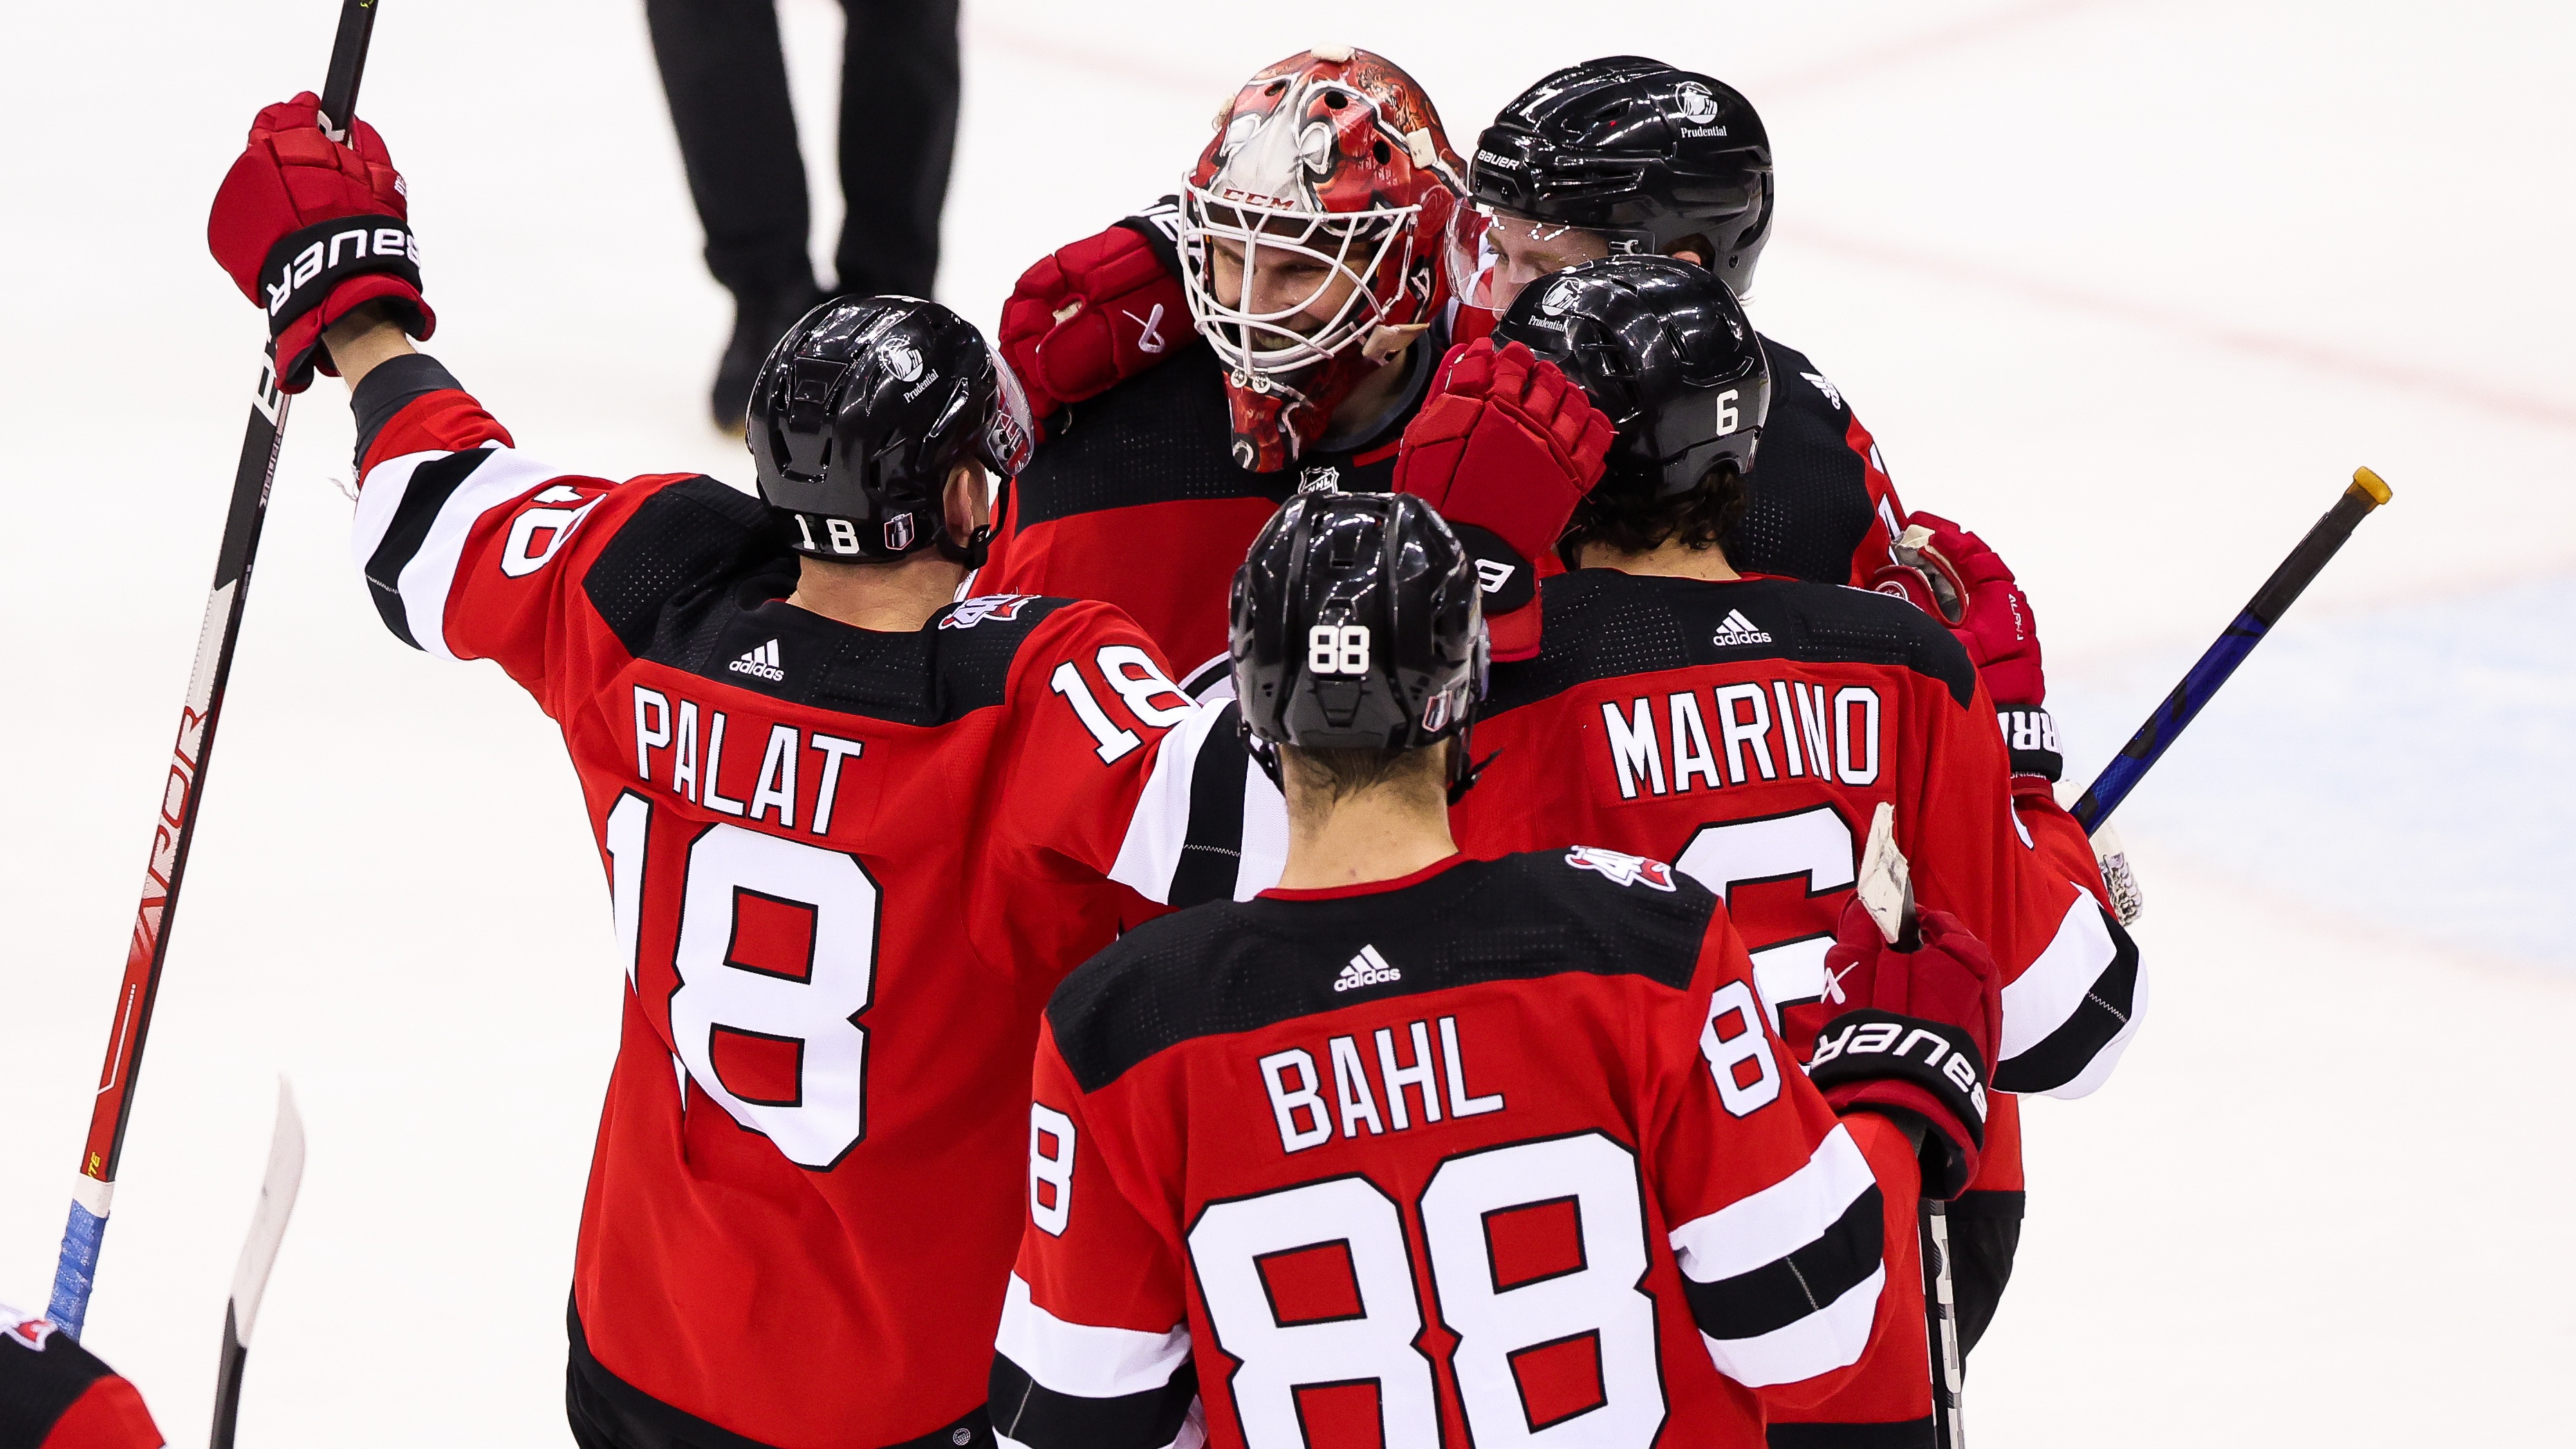 Devils vs Hurricanes live stream how to watch NHL Stanley Cup Playoffs, Game 5 TechRadar